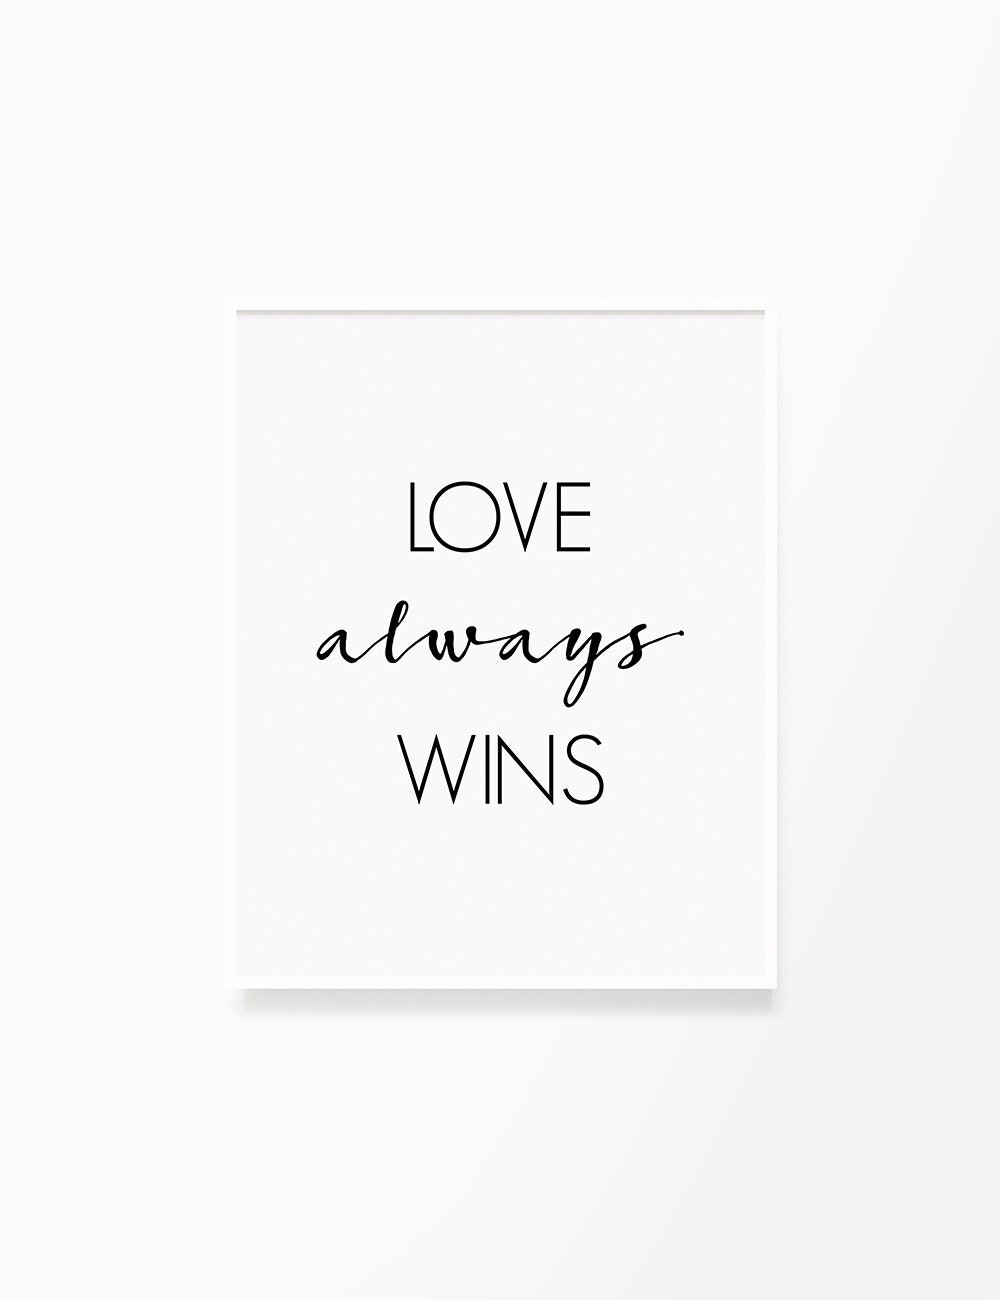 Printable - Elegant Etsy Quote, Minimalist, Motivational, Inspirational, Love Design Typography Poster, Clean, Love Wins, Wall Art, Love Always